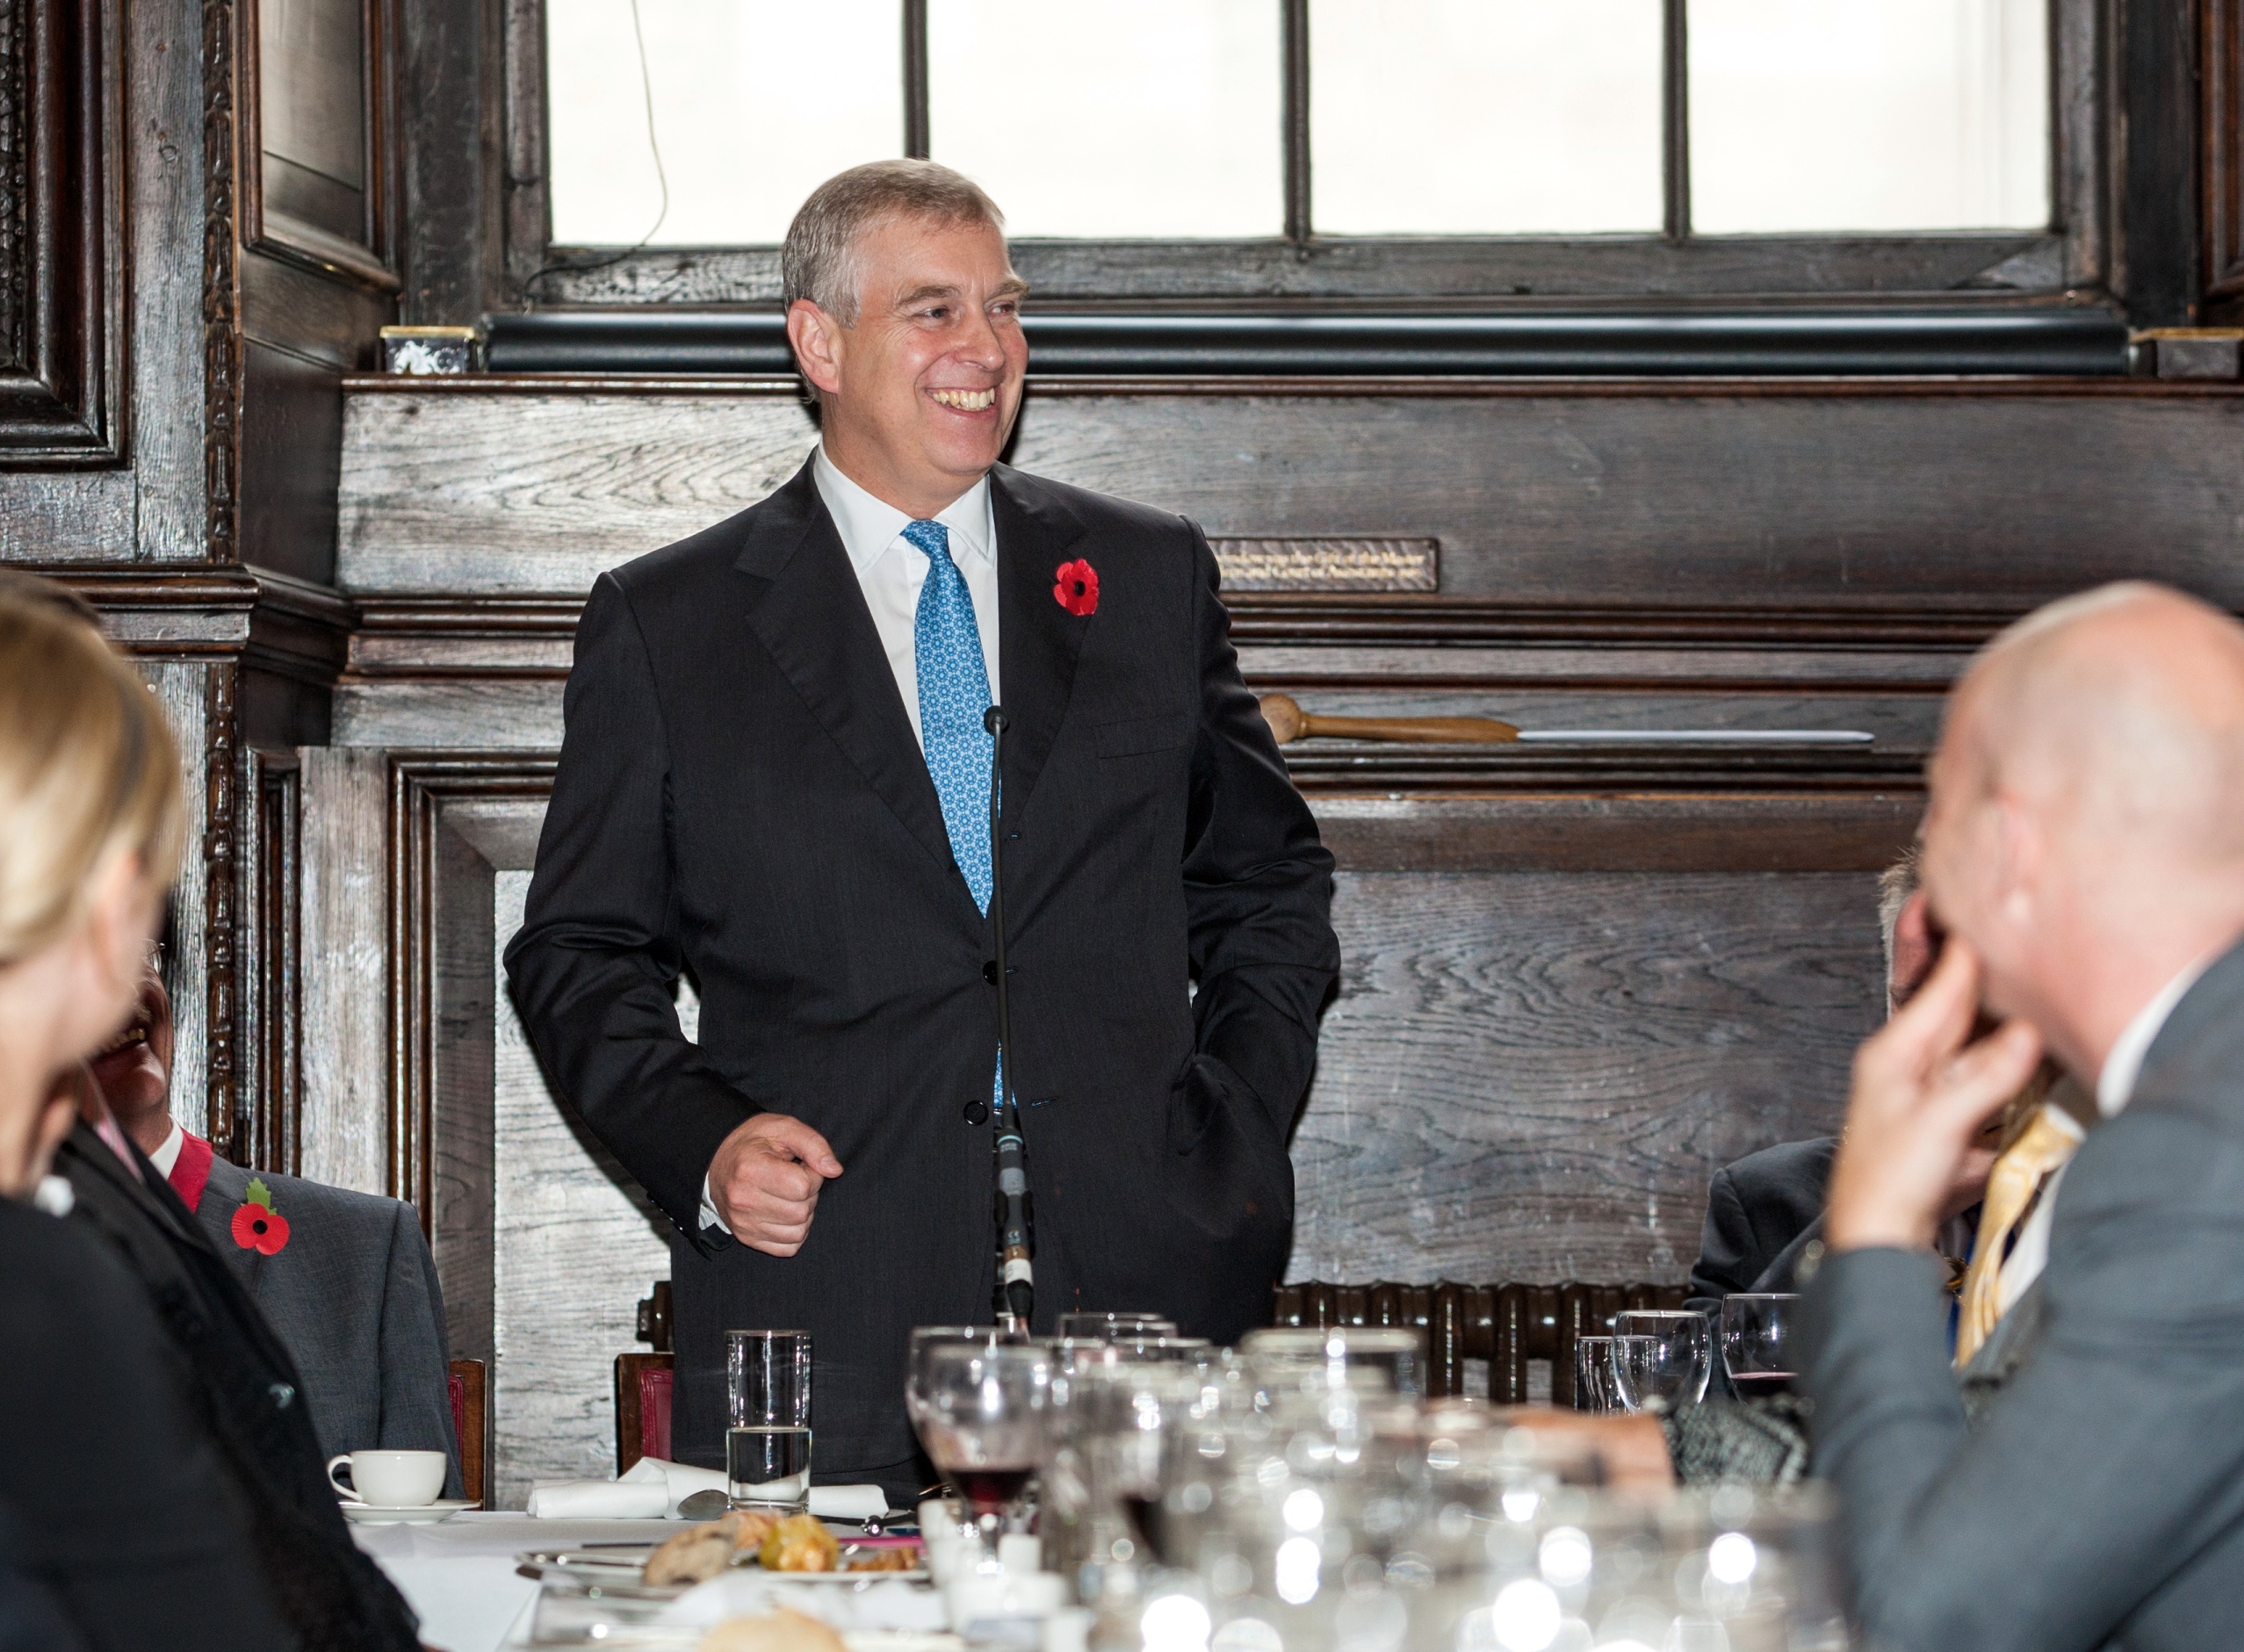 HRH The Duke of York, KG speaks about the importance to the UK economy of SMEs, export markets and apprenticeships at The Printing Charity's 186th Annual Luncheon